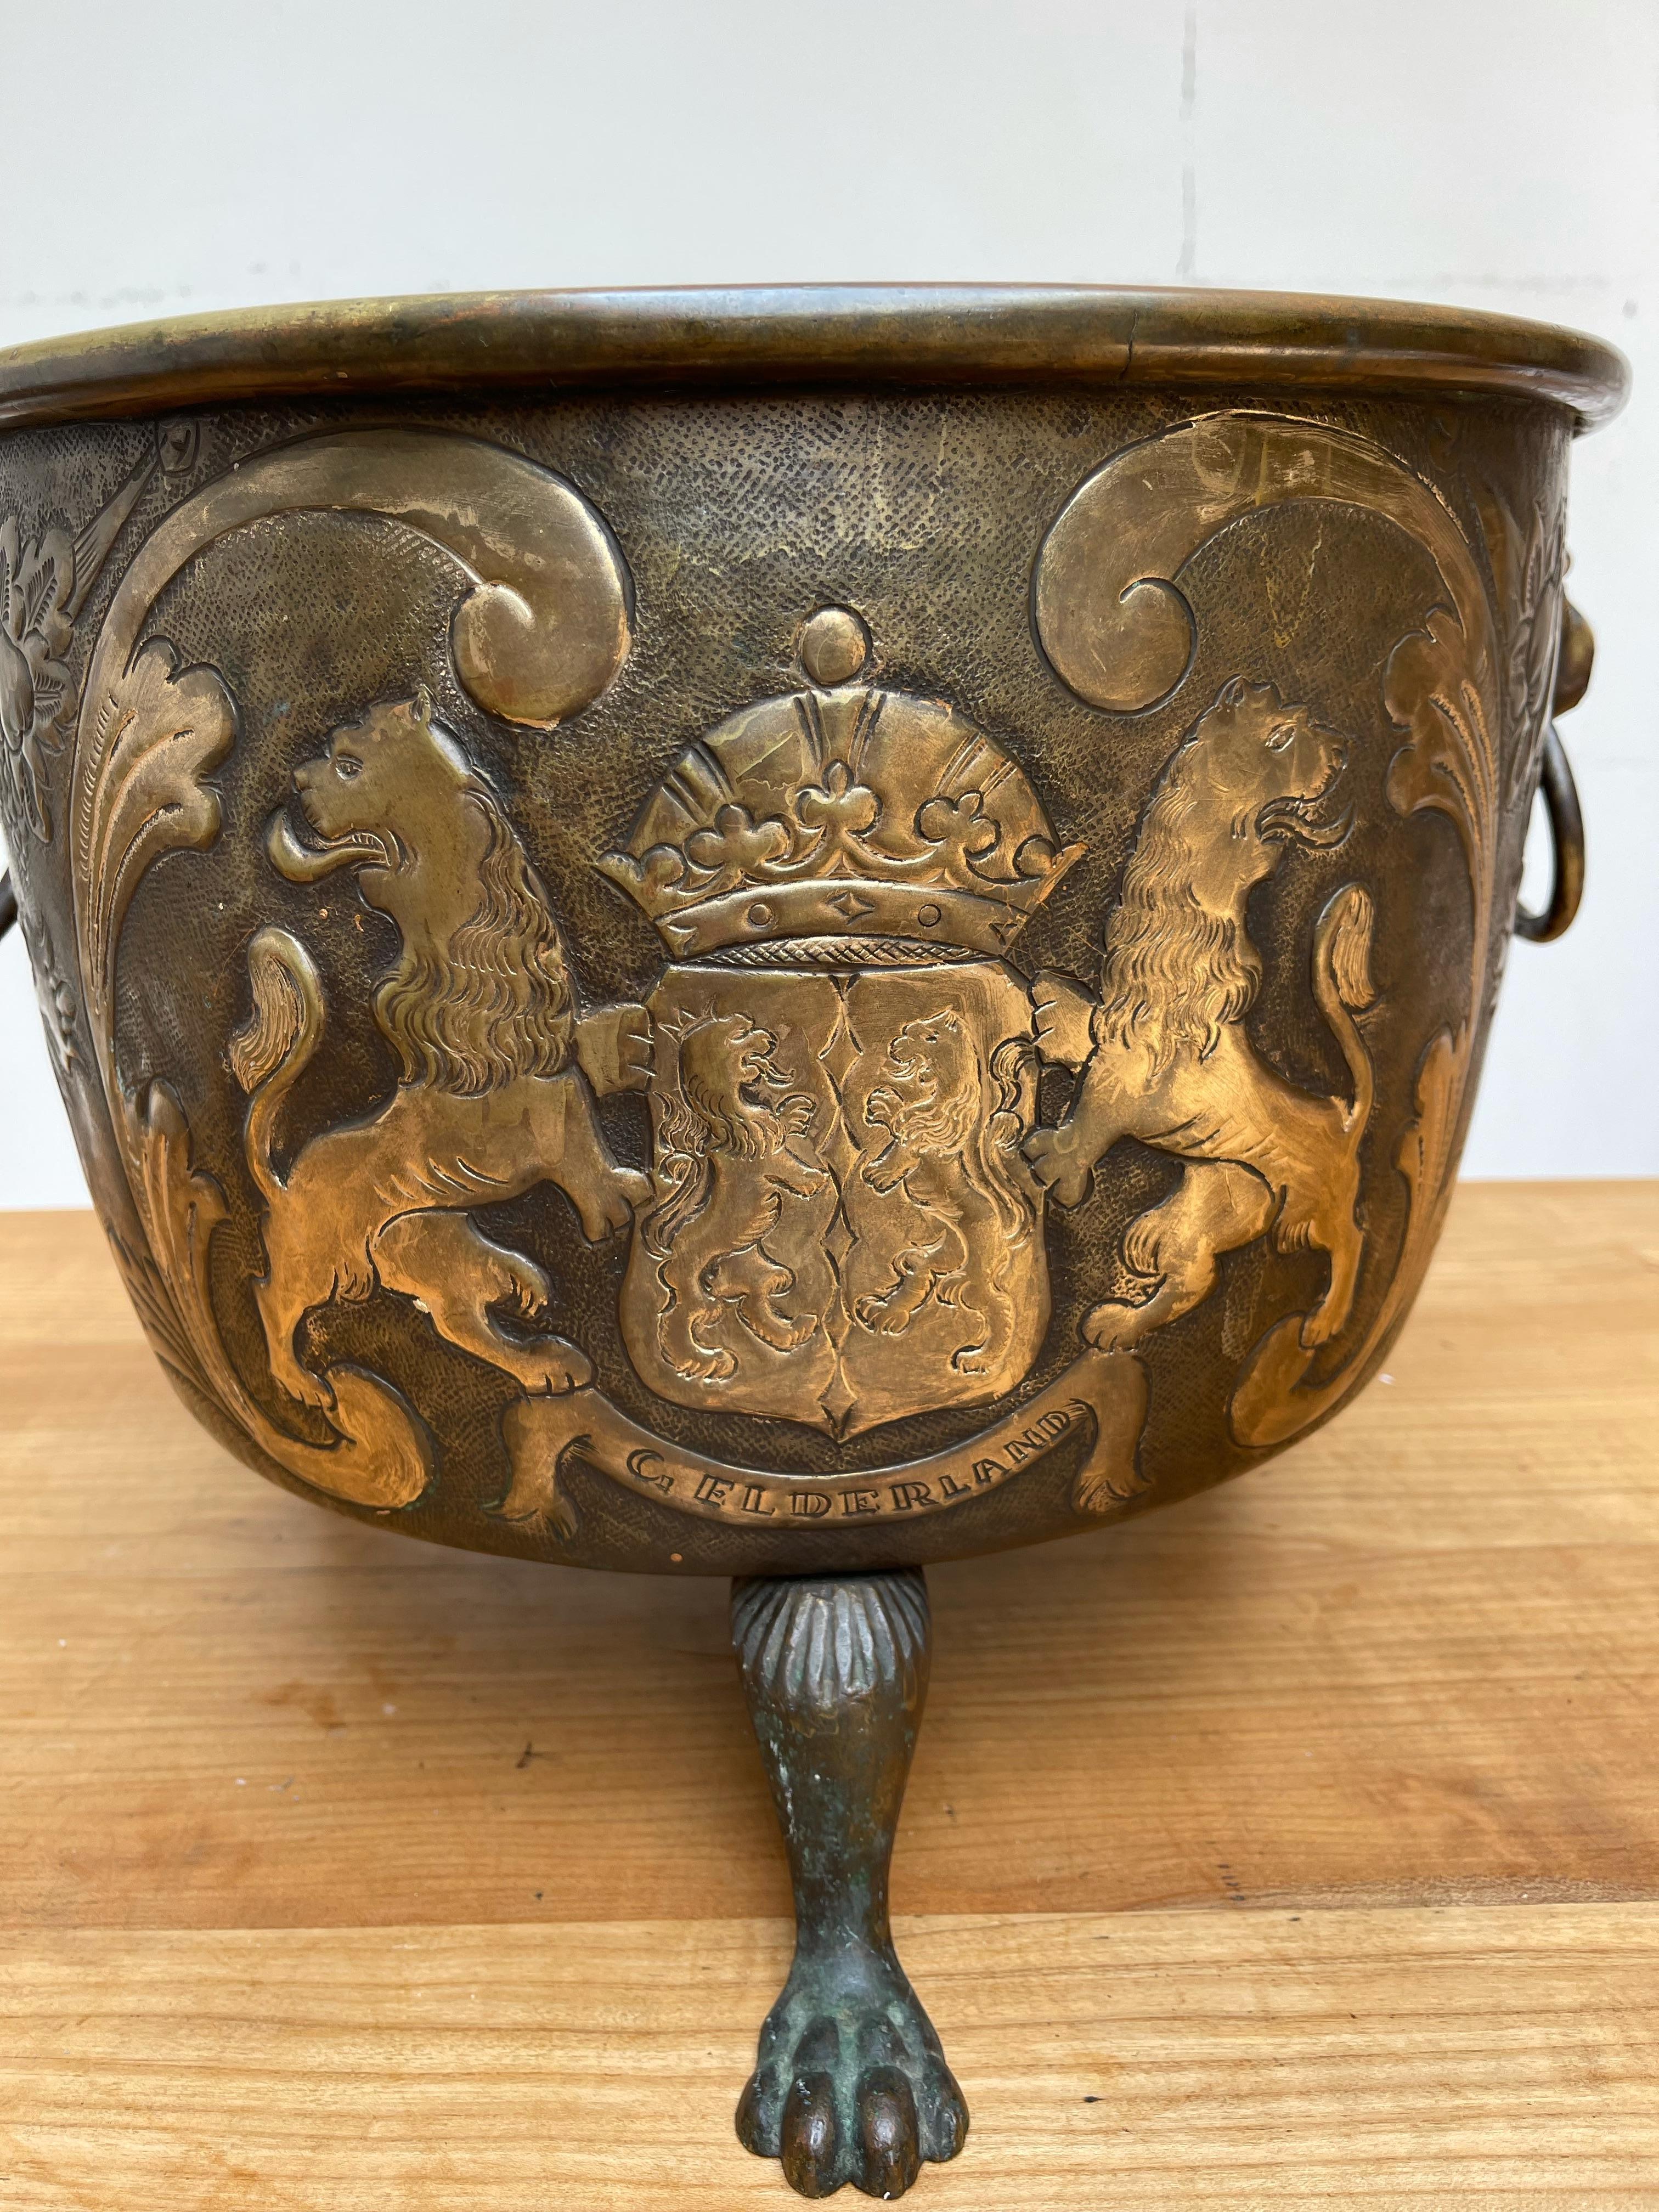 Sizeable and museum quality, embossed copper collecting bucket on lion claw feet.

This stunning, sturdy and heavy antique brass bucket is another one of our recent rare finds. When used as a log bucket, this handcrafted antique can single handedly